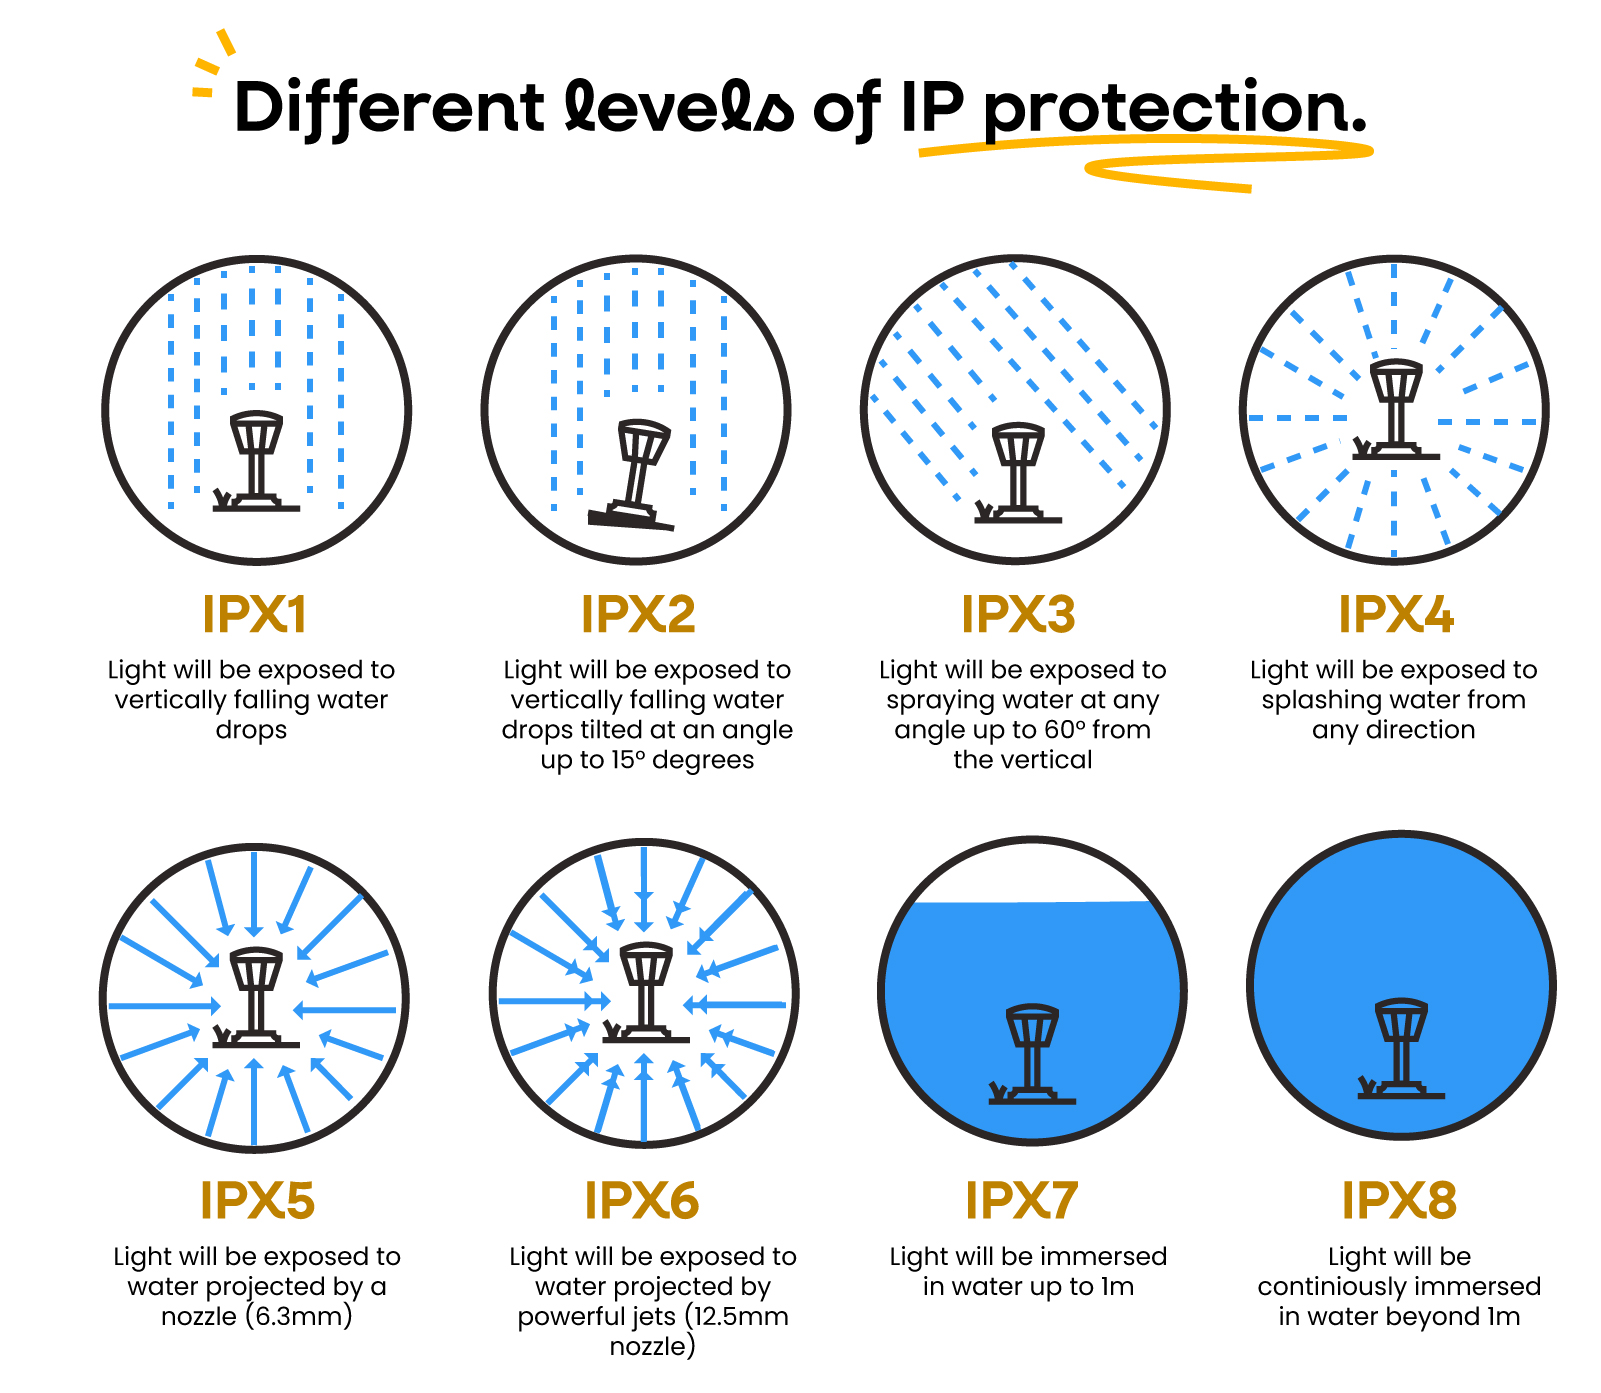 Different levels of IP protection